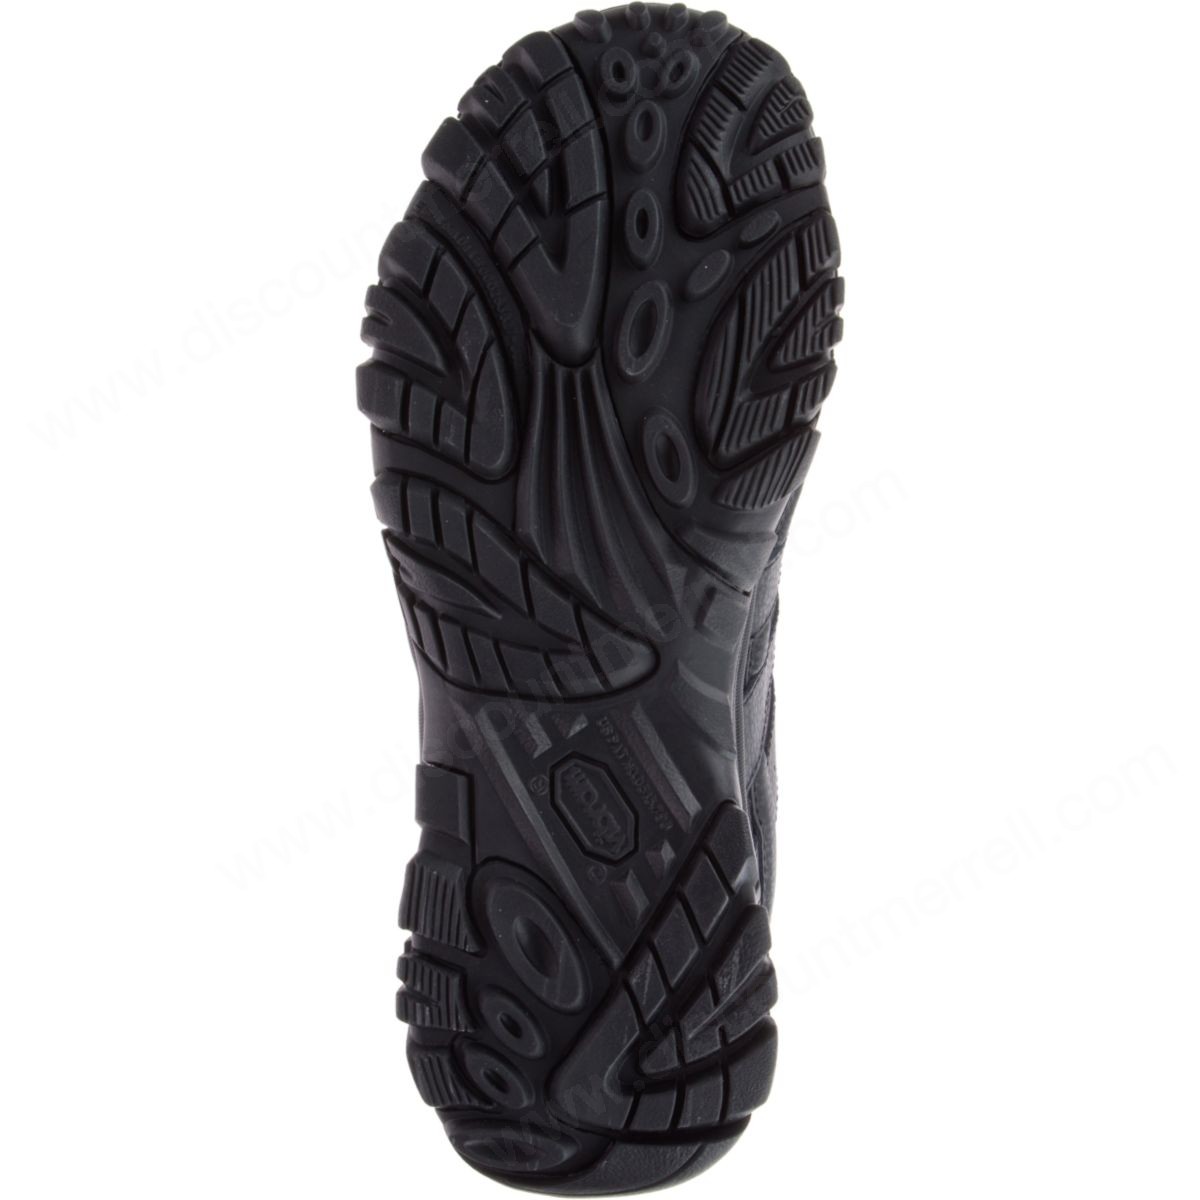 Merrell Man's Moab Tactical Shoes Wide Black - -1